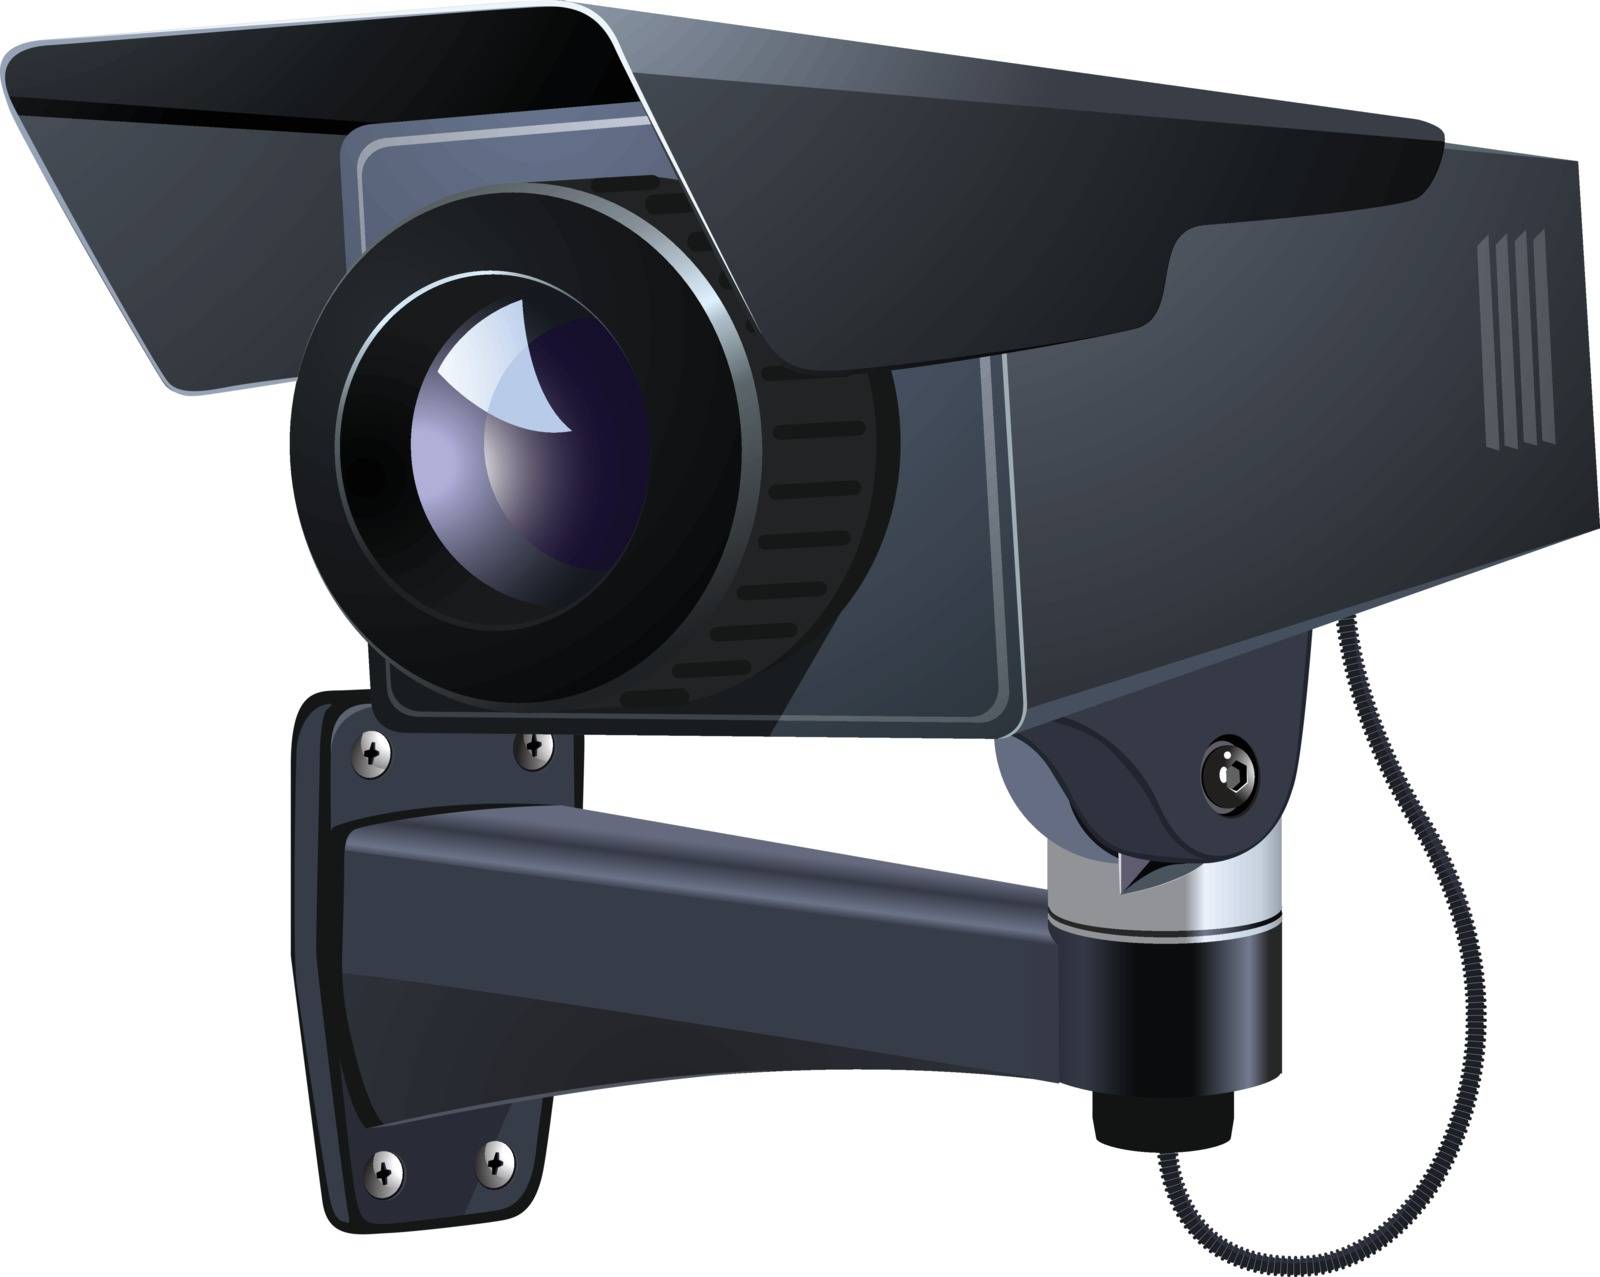 Camera of the video observation vector illustration in eps 10